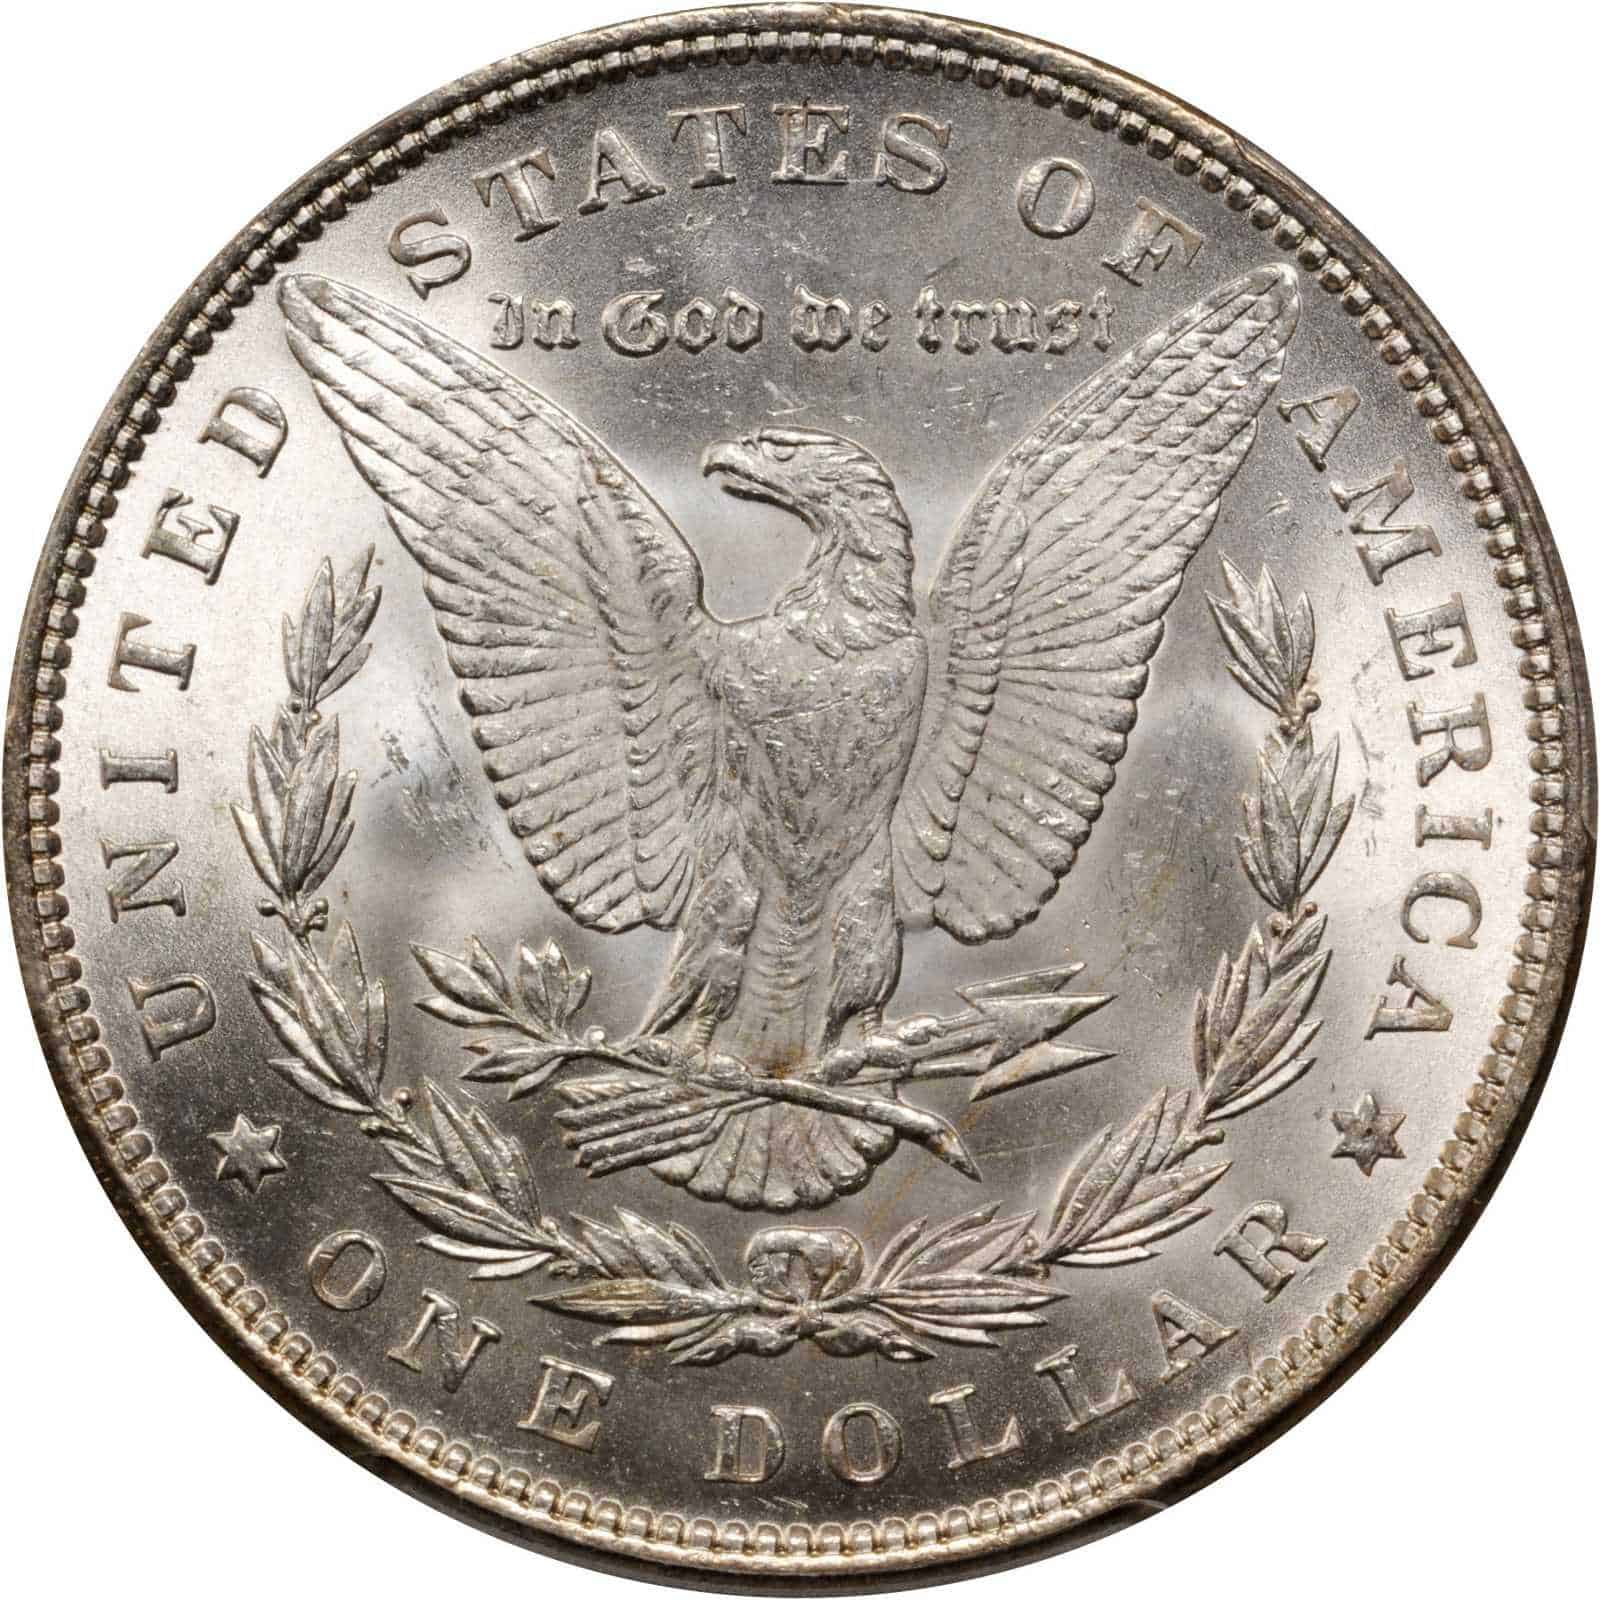 The Reverse of the 1891 Silver Dollar